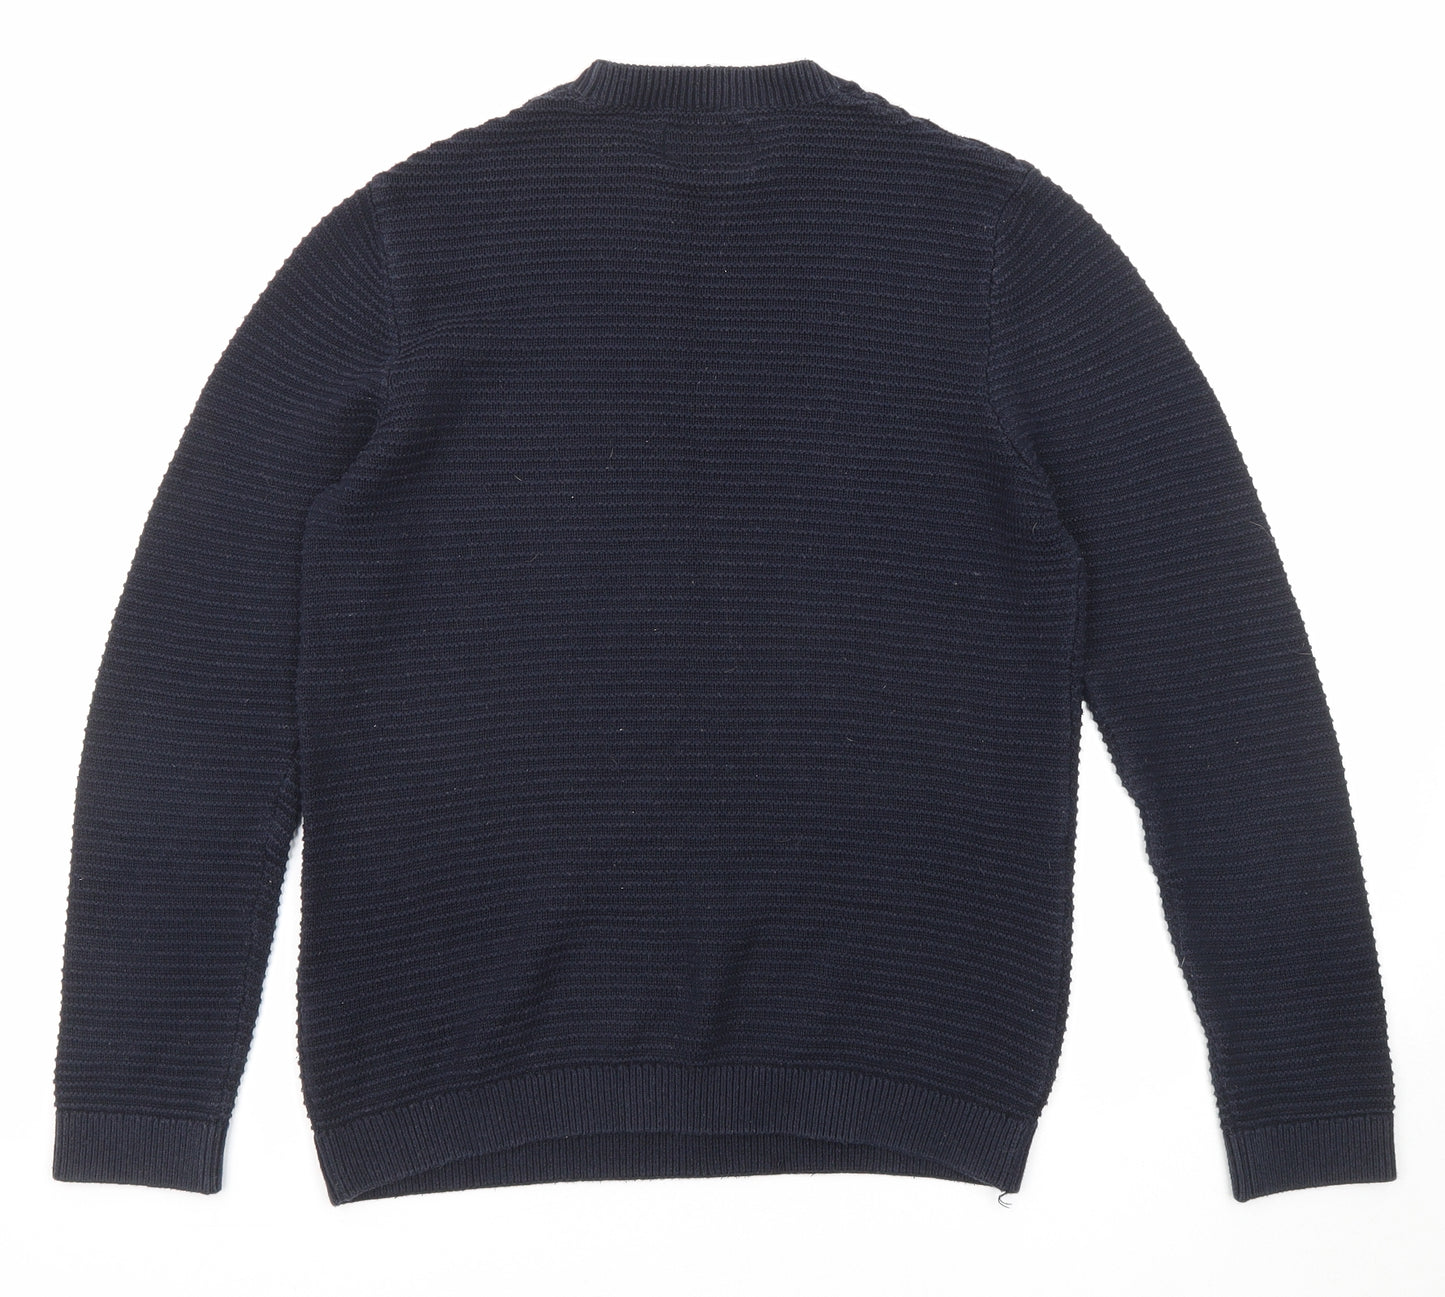 Topman Mens Blue Round Neck Cotton Pullover Jumper Size XS Long Sleeve